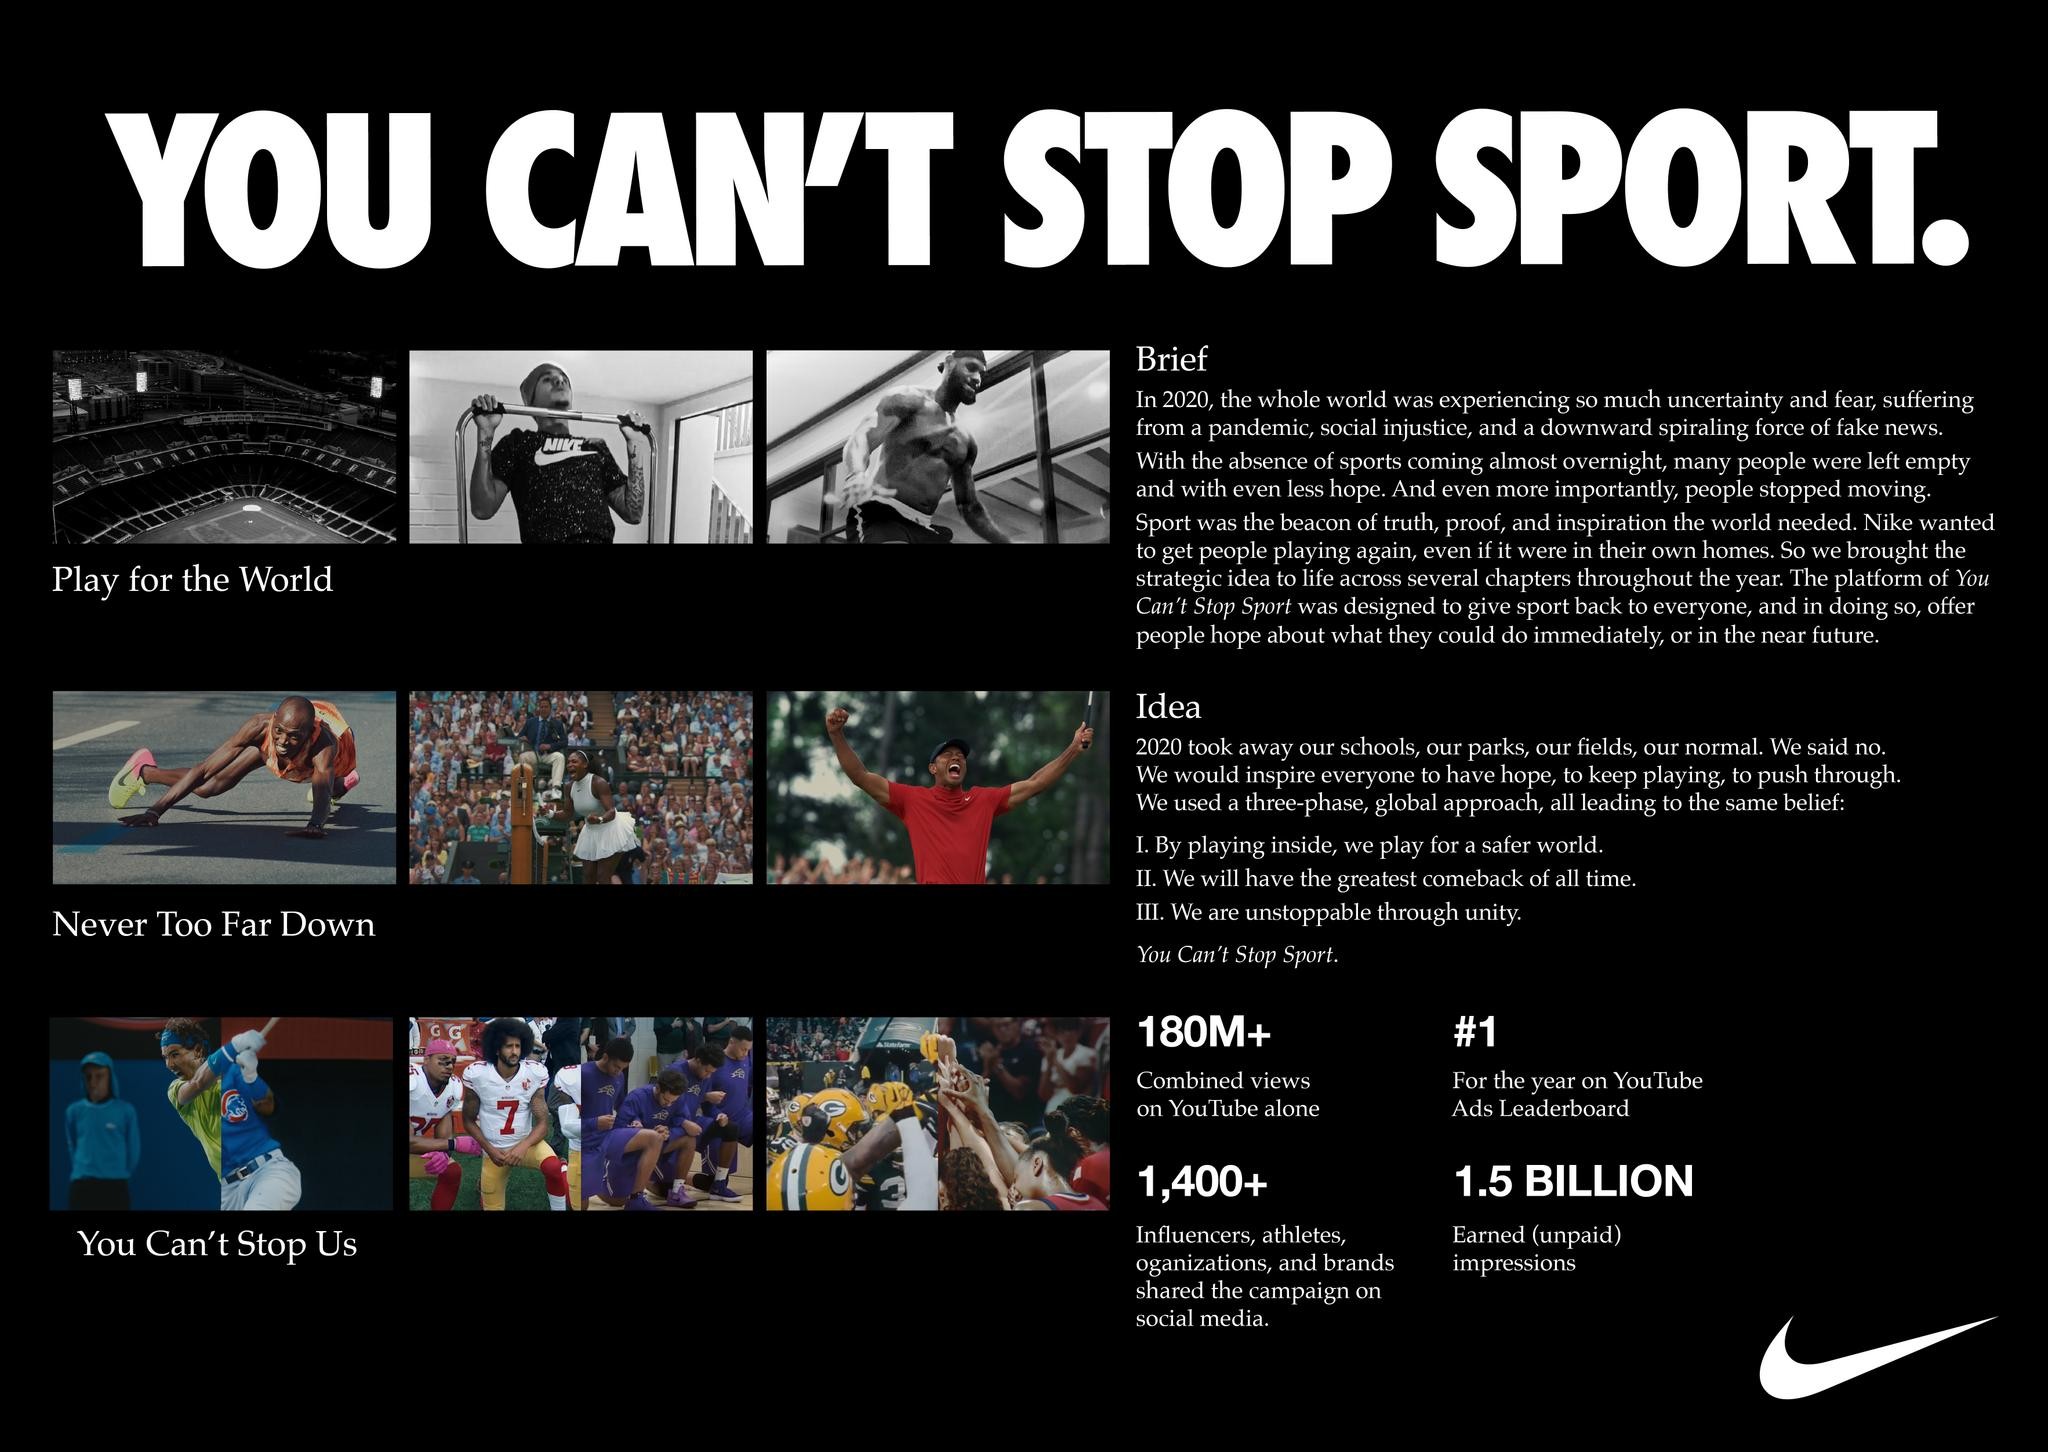 NIKE: YOU CAN'T STOP SPORT